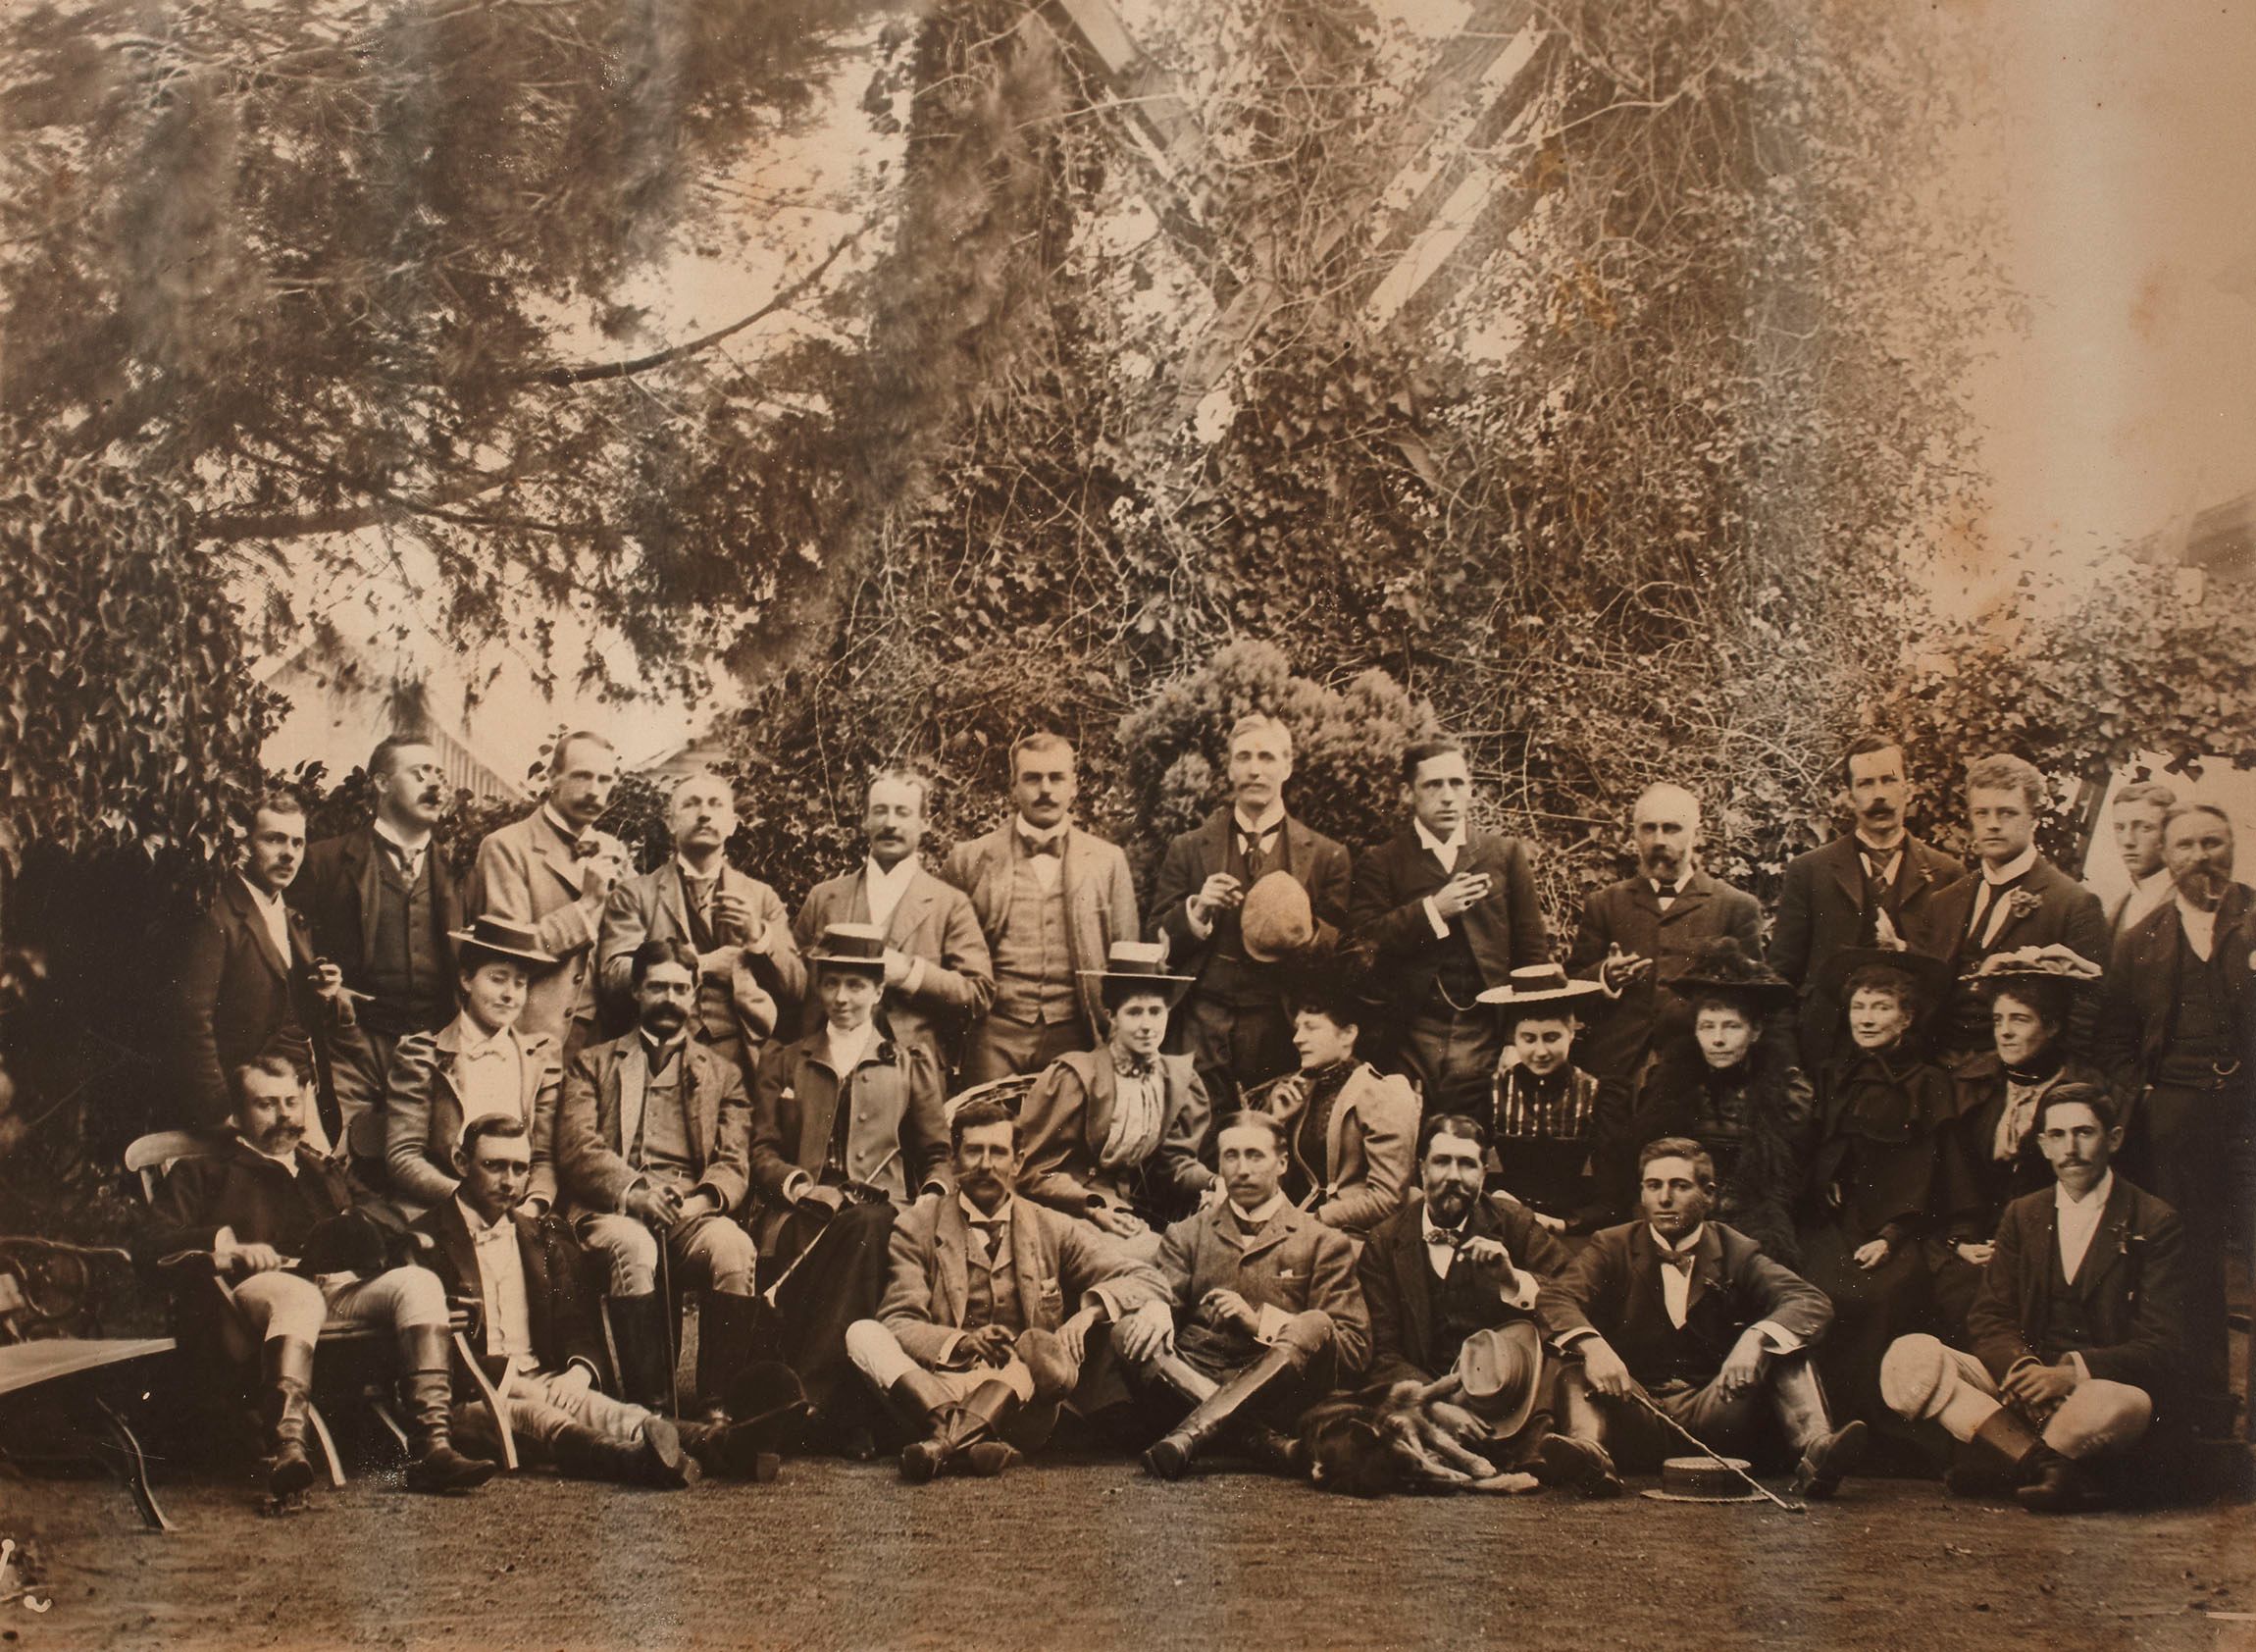 A black and white photo of a group of people